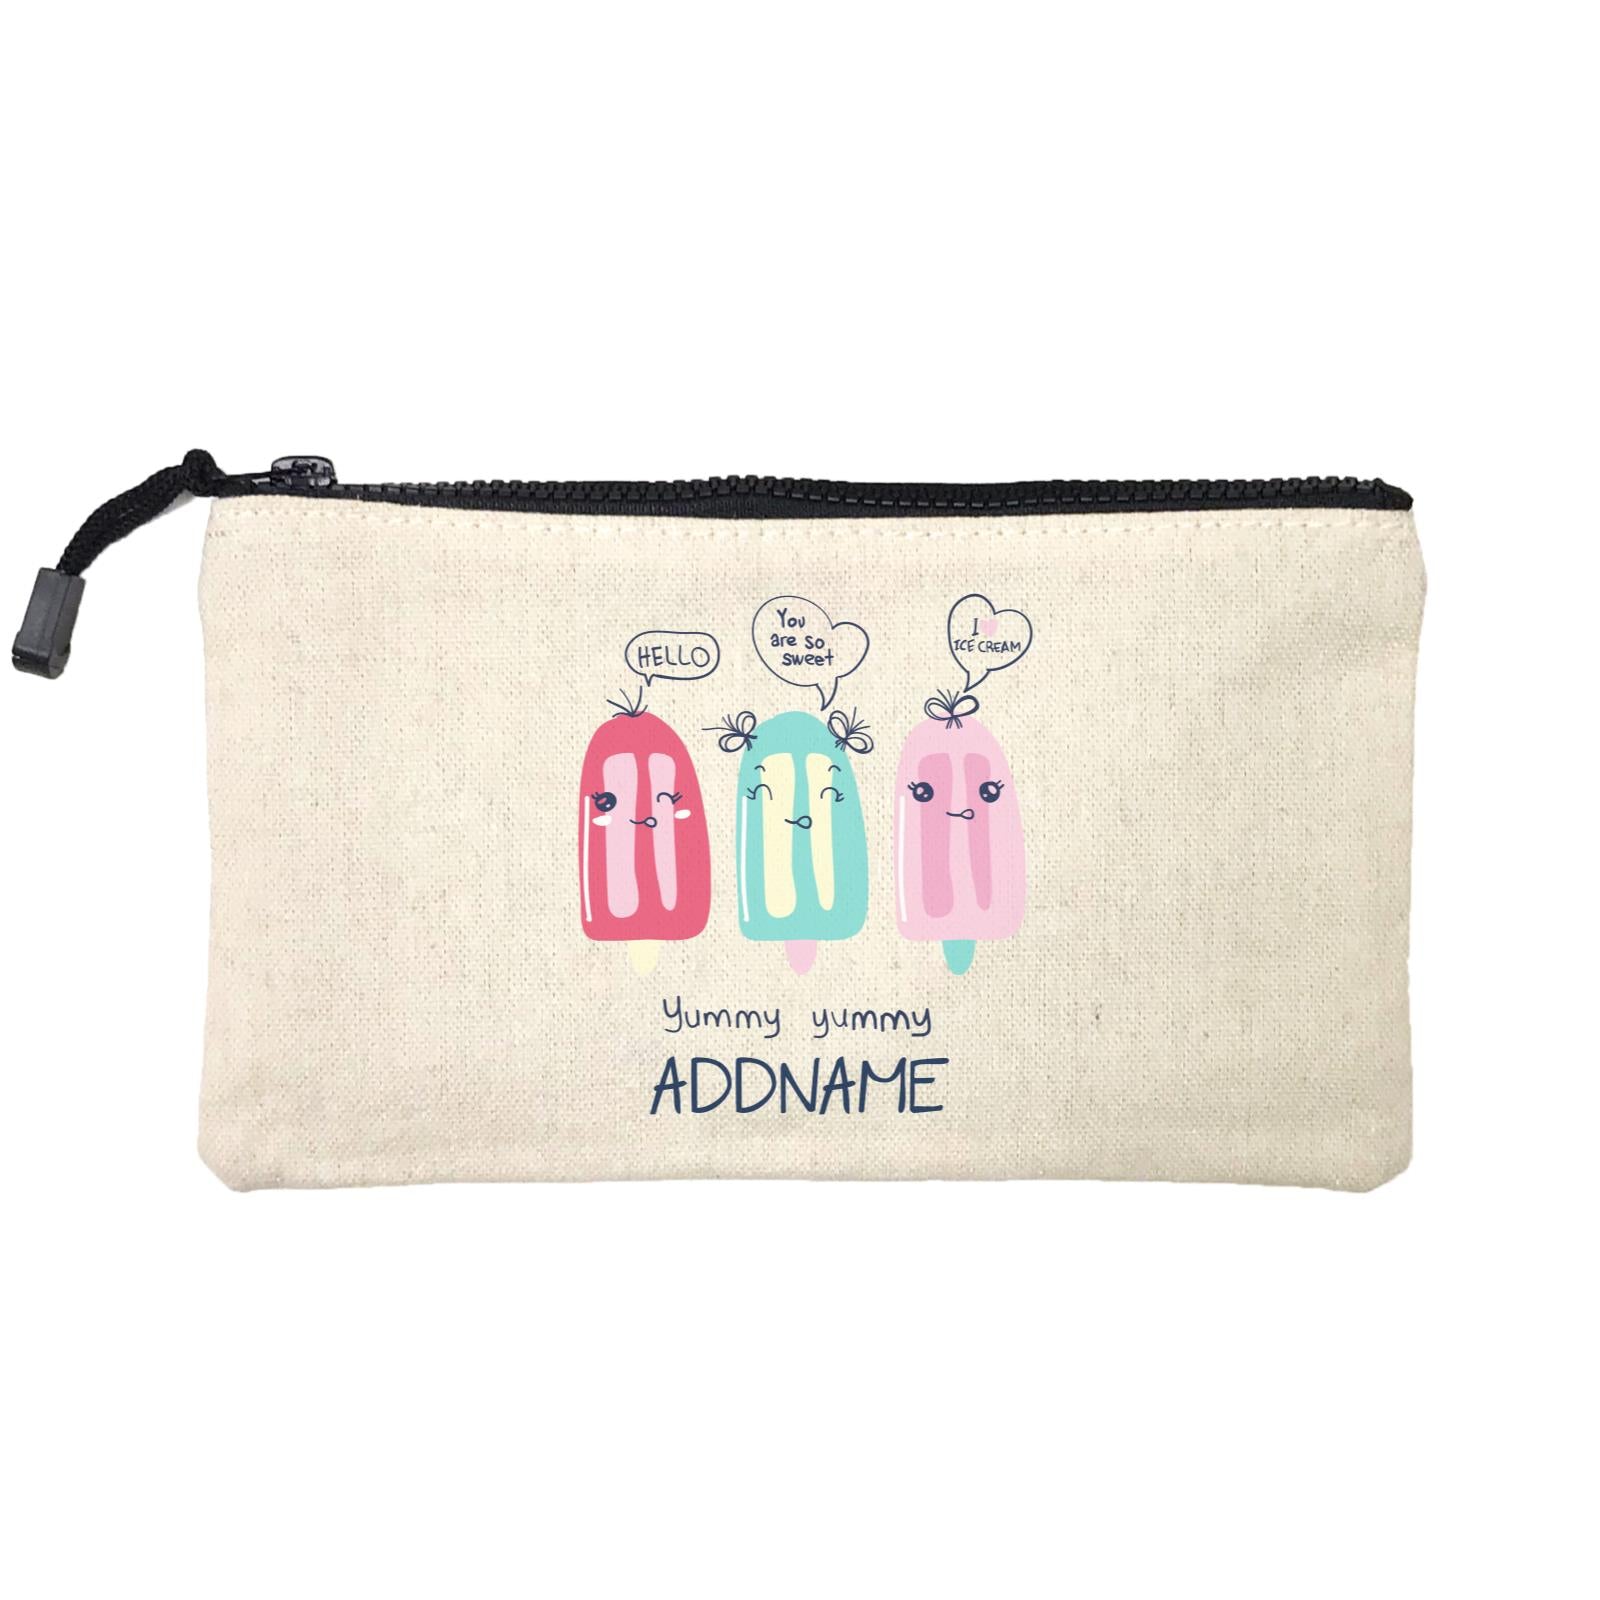 Cool Vibrant Series Yummy Ice Cream Addname Mini Accessories Stationery Pouch